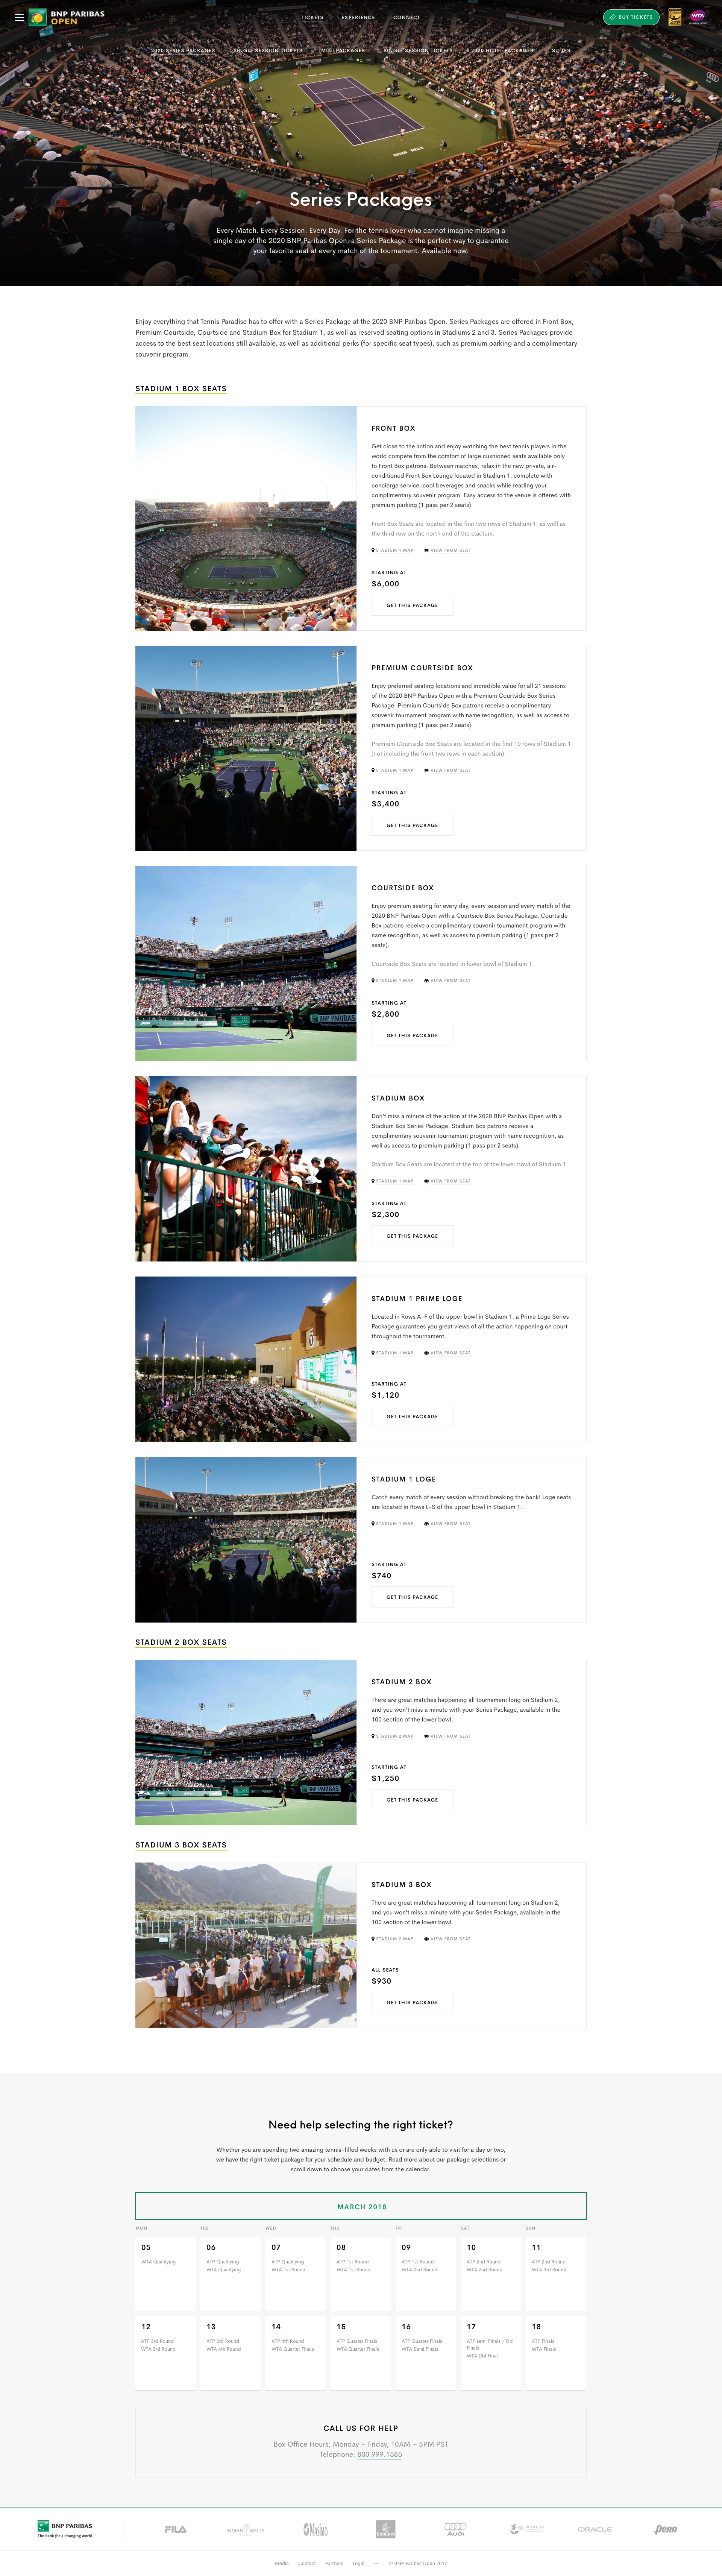 BNPPO-Tickets-Series-Packages